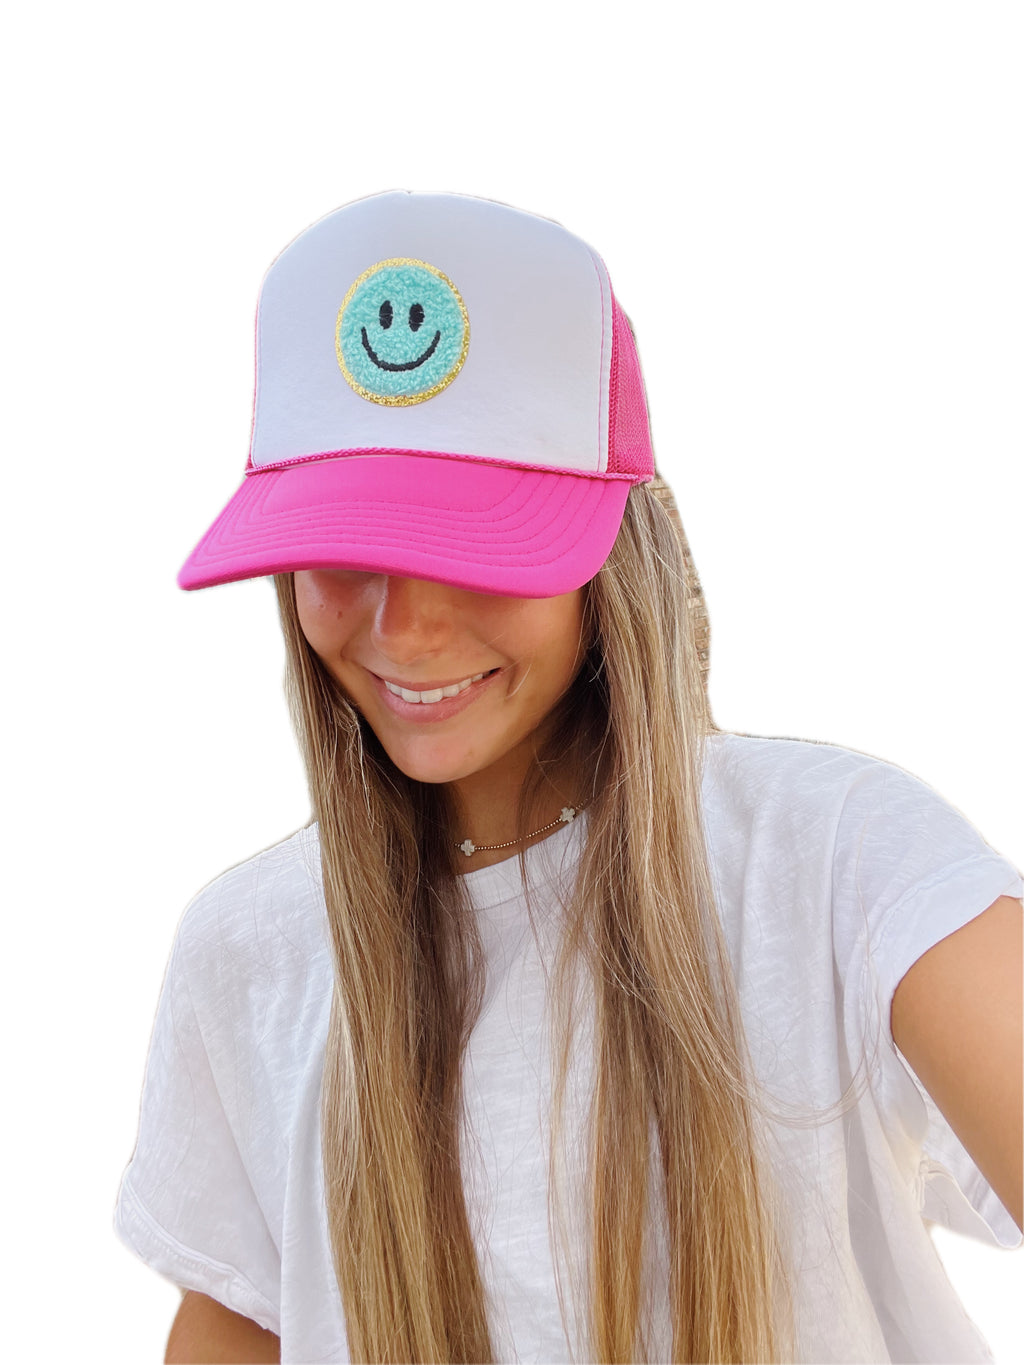 TWO TONED PINK AND WHITE TRUCKER WITH SMALL BLUE SMILEY ☻